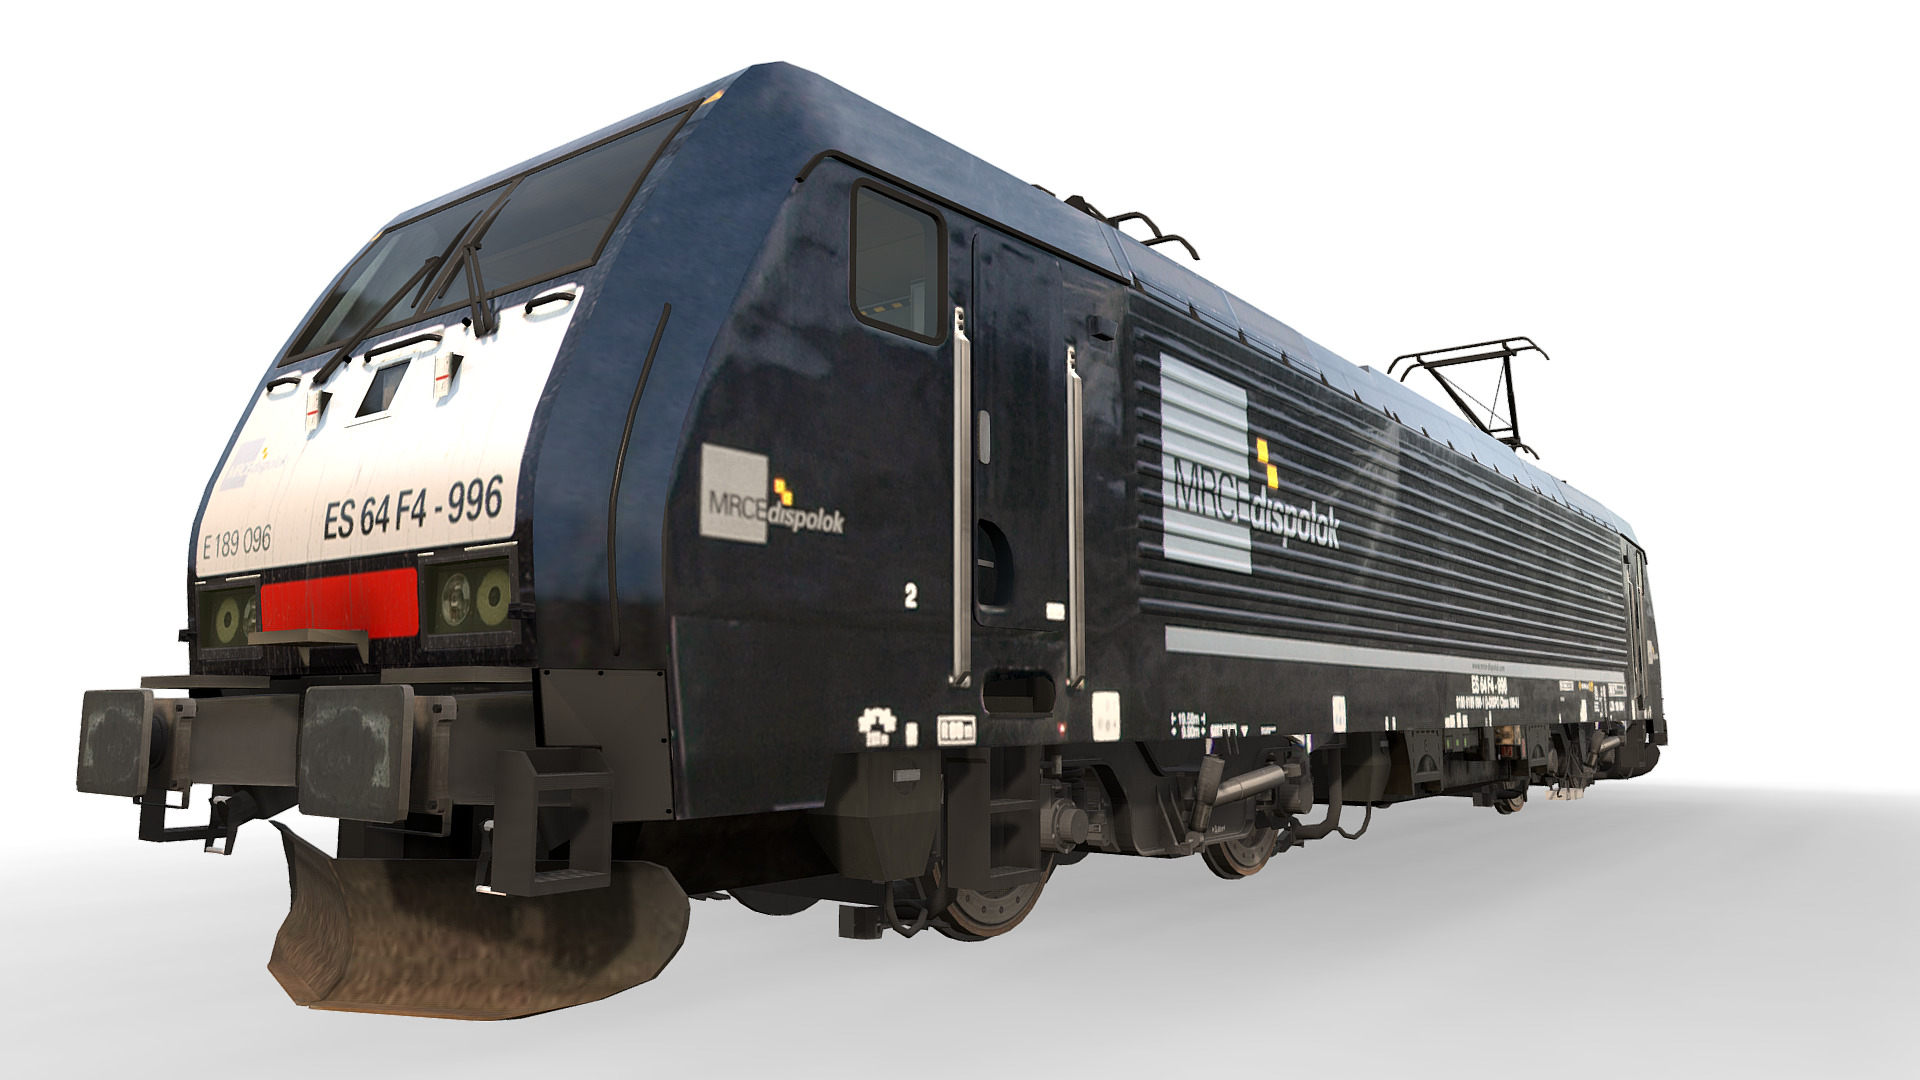 3D model Locomotive Class ES64F4 – 189 096-1 – MRCE - This is a 3D model of the Locomotive Class ES64F4 - 189 096-1 - MRCE. The 3D model is about a black train with a white background.